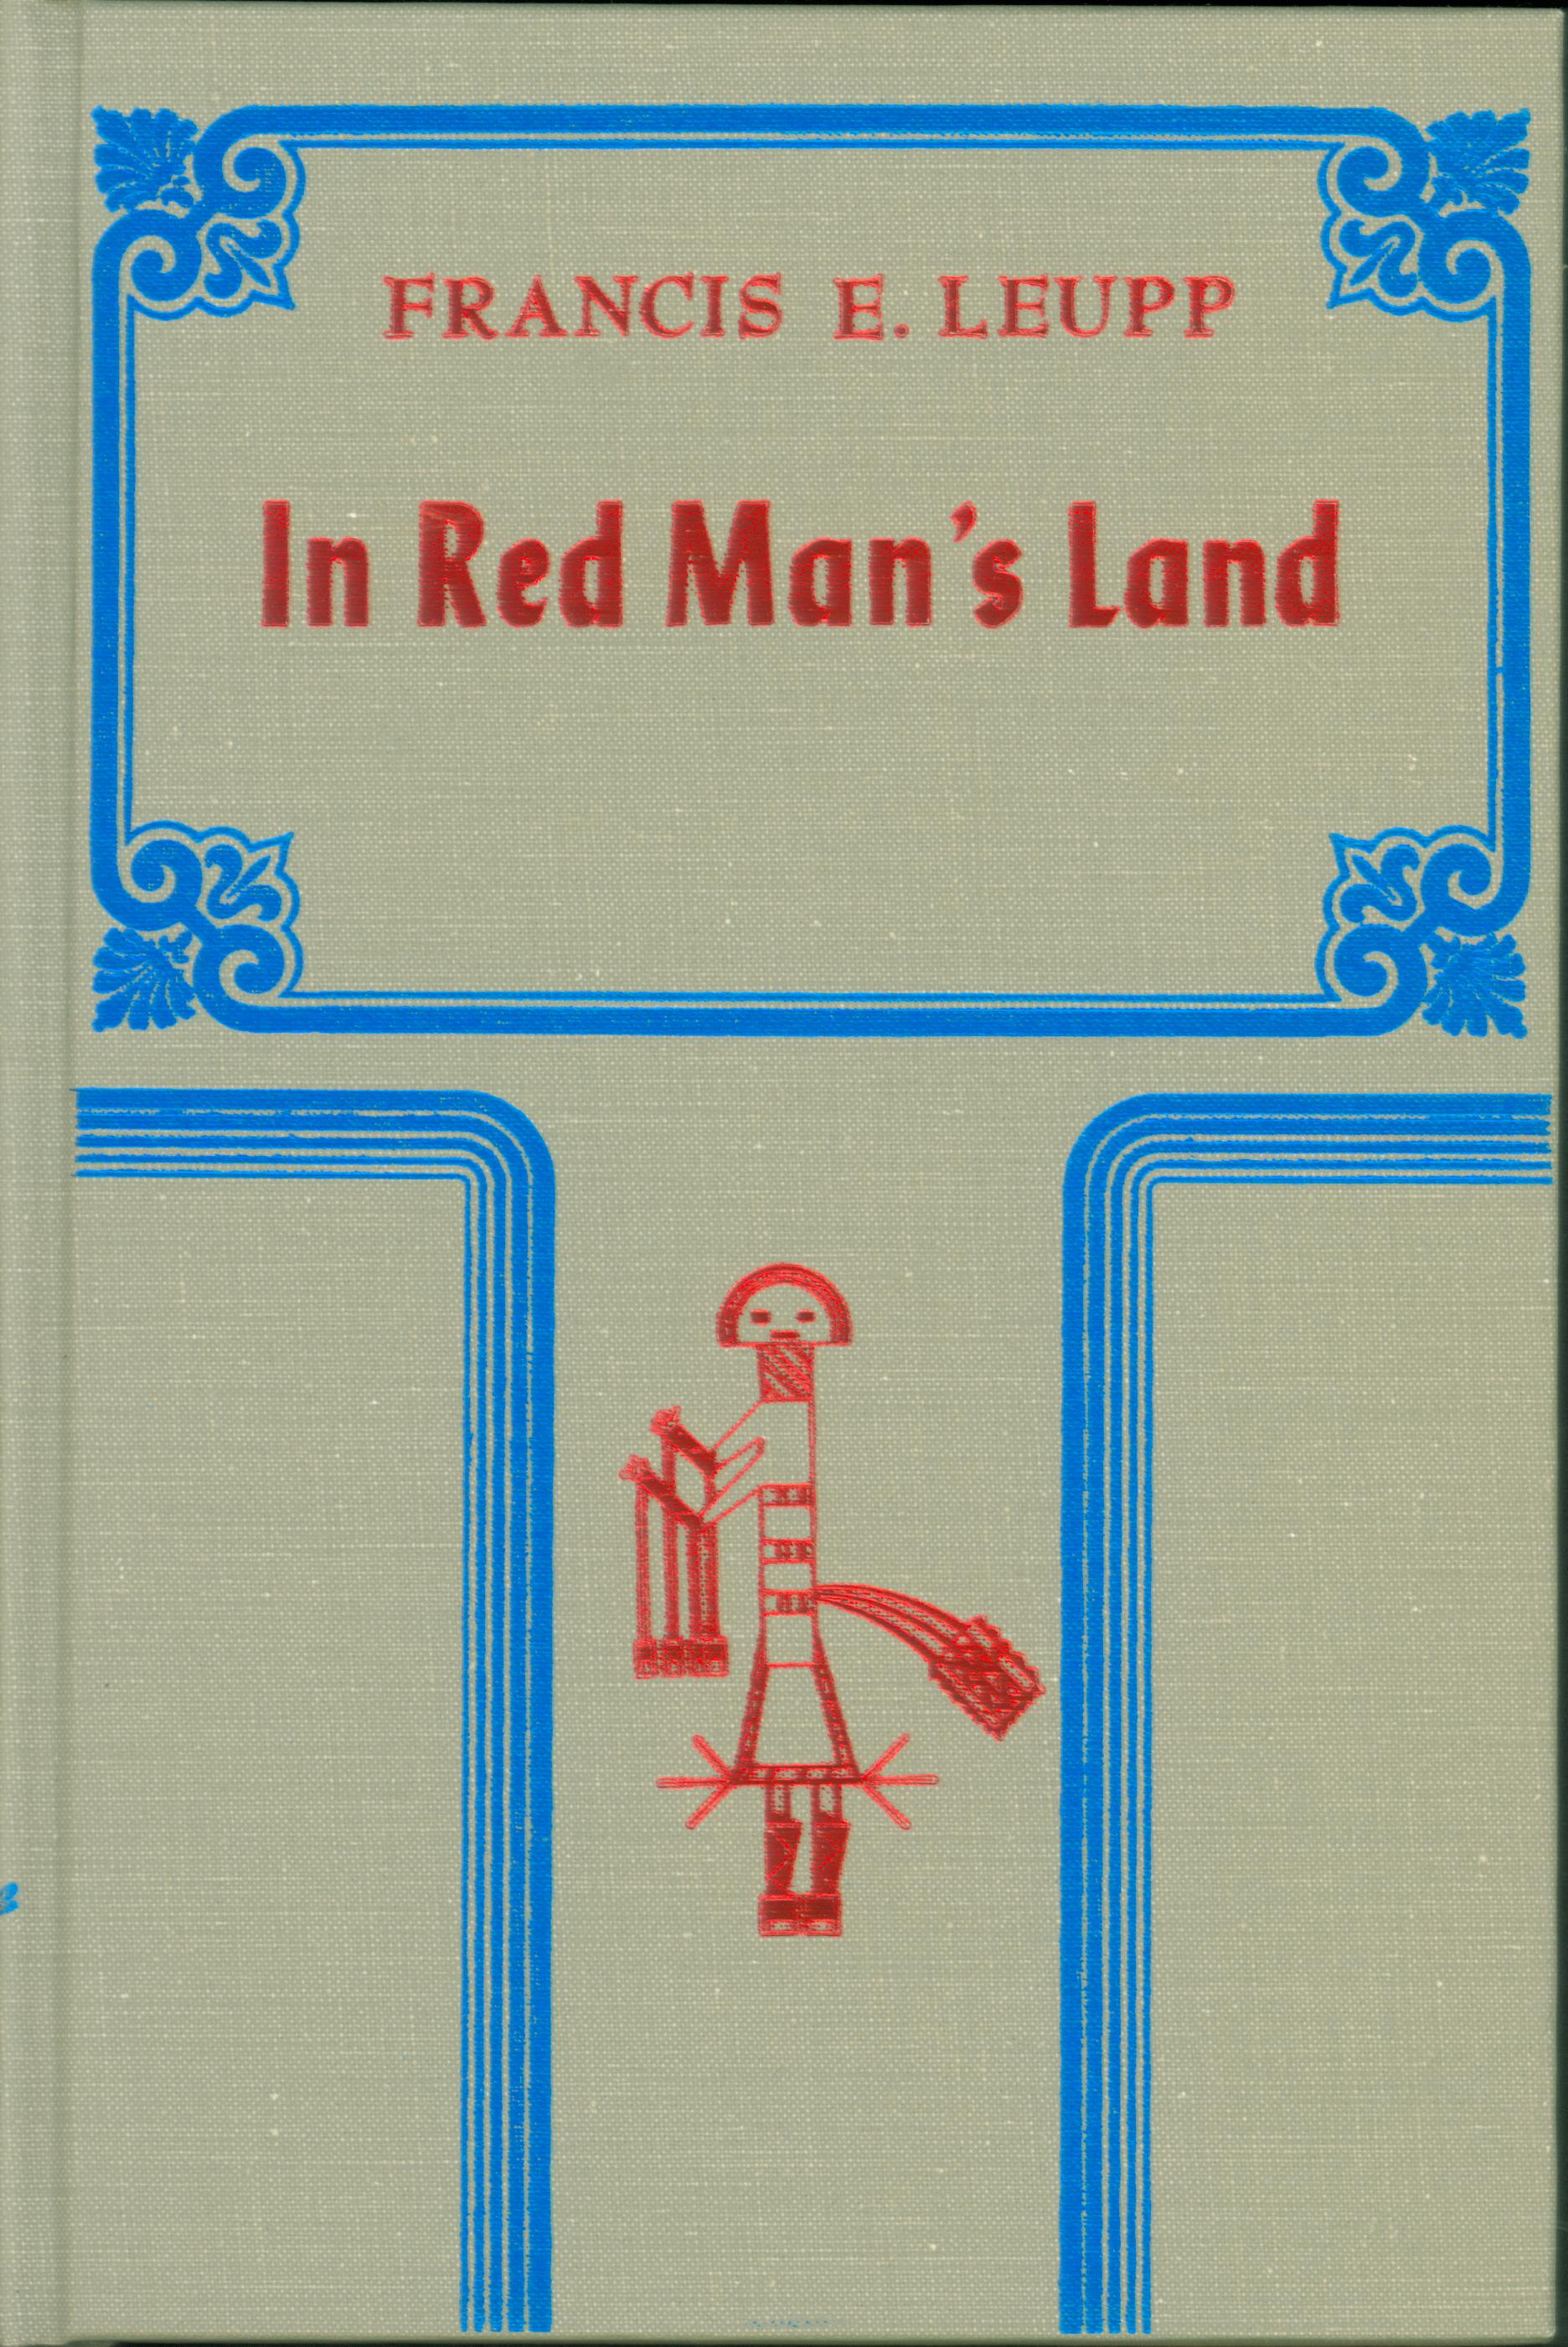 IN RED MAN'S LAND; a study of the American Indian.